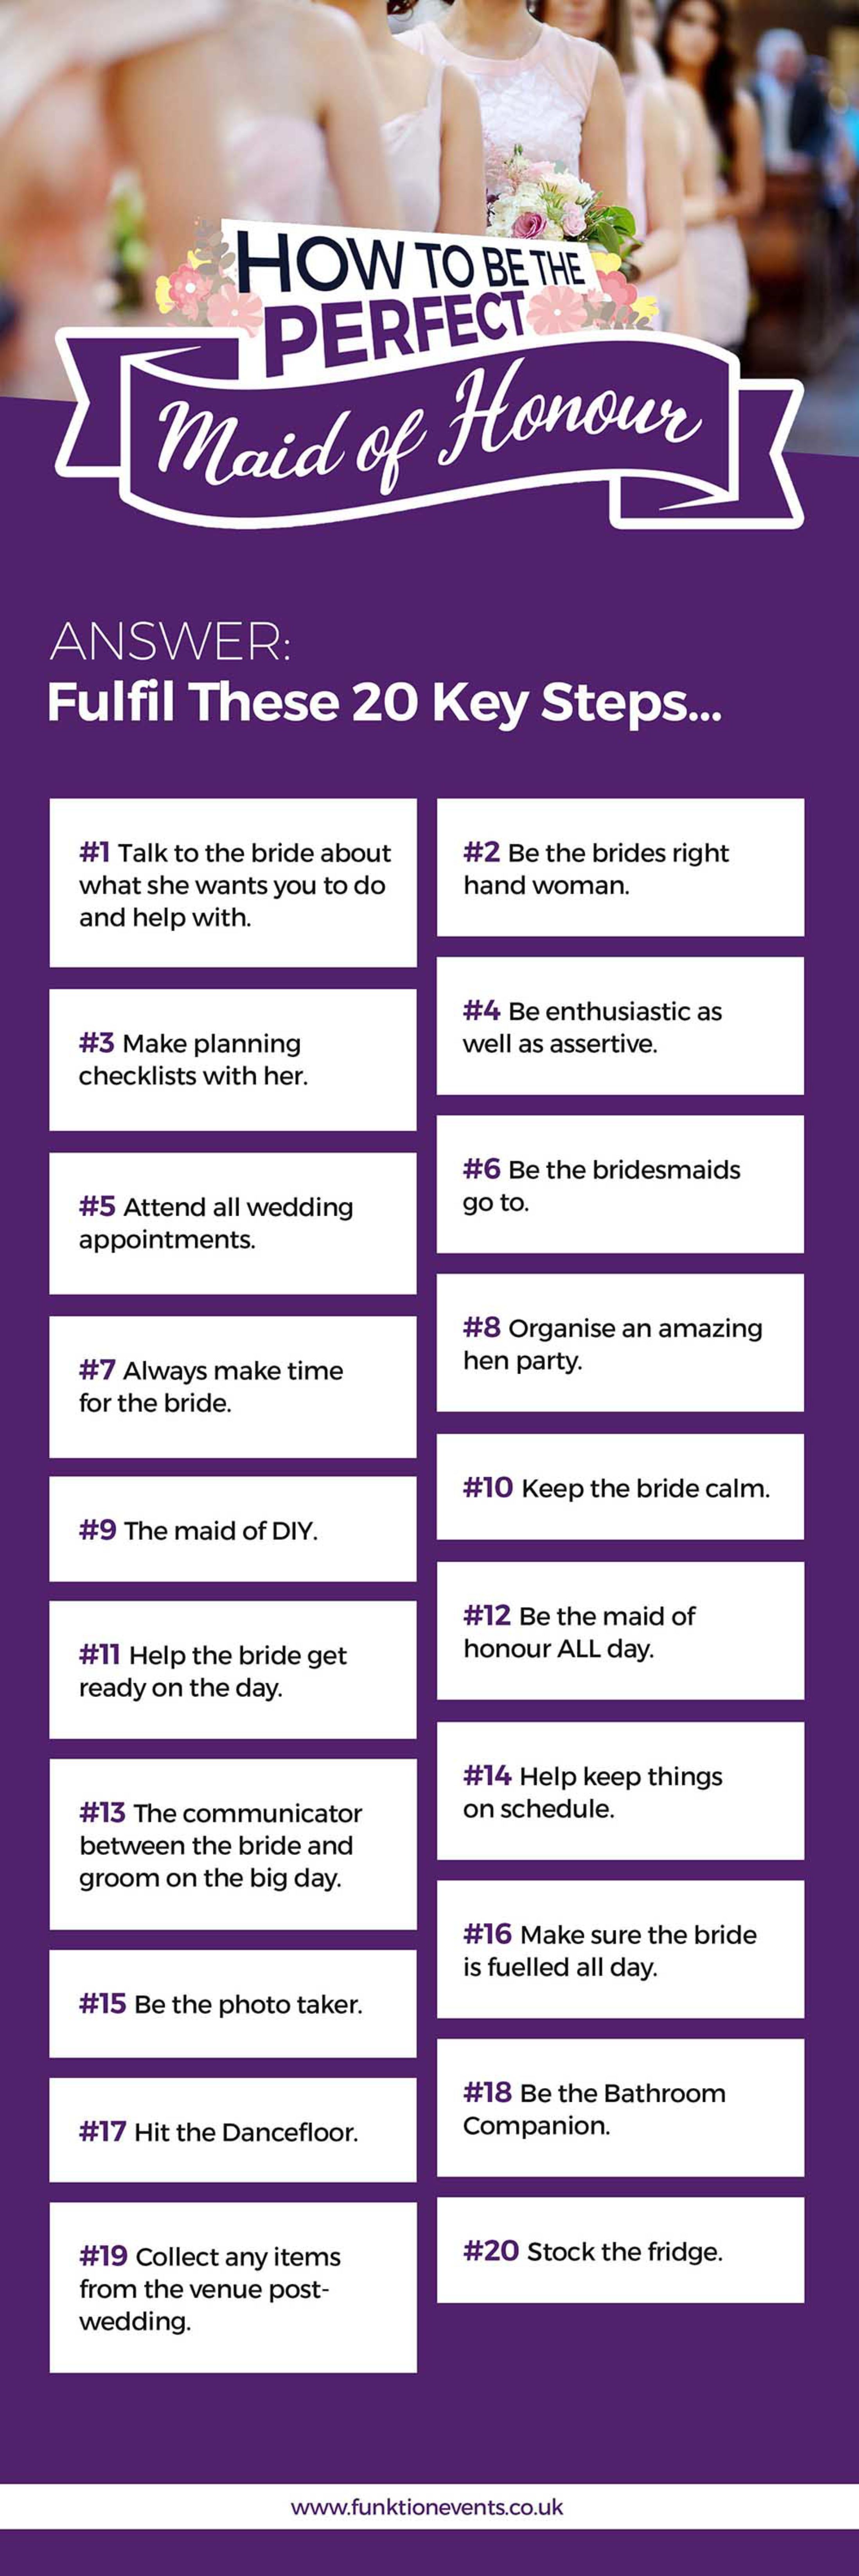 How to be the Perfect Maid of Honour